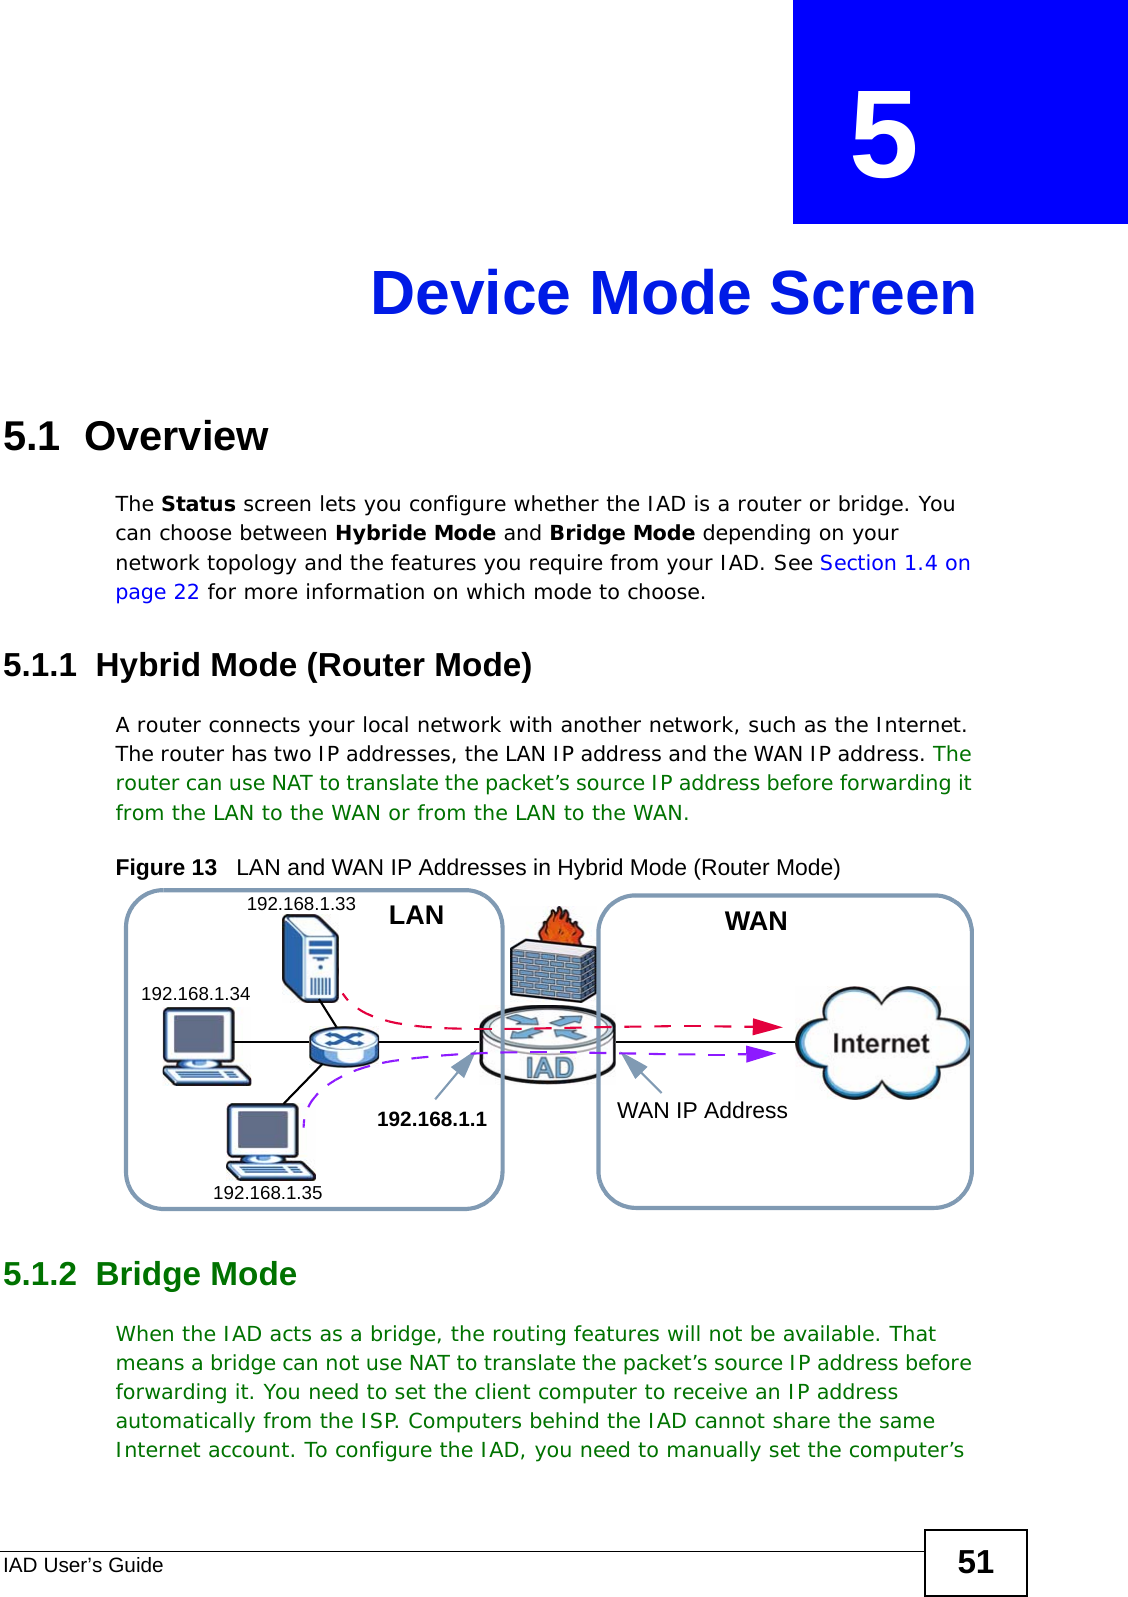 IAD User’s Guide 51CHAPTER  5 Device Mode Screen5.1  OverviewThe Status screen lets you configure whether the IAD is a router or bridge. You can choose between Hybride Mode and Bridge Mode depending on your network topology and the features you require from your IAD. See Section 1.4 on page 22 for more information on which mode to choose.5.1.1  Hybrid Mode (Router Mode)A router connects your local network with another network, such as the Internet. The router has two IP addresses, the LAN IP address and the WAN IP address. The router can use NAT to translate the packet’s source IP address before forwarding it from the LAN to the WAN or from the LAN to the WAN.Figure 13   LAN and WAN IP Addresses in Hybrid Mode (Router Mode)5.1.2  Bridge ModeWhen the IAD acts as a bridge, the routing features will not be available. That means a bridge can not use NAT to translate the packet’s source IP address before forwarding it. You need to set the client computer to receive an IP address automatically from the ISP. Computers behind the IAD cannot share the same Internet account. To configure the IAD, you need to manually set the computer’s 192.168.1.33192.168.1.35192.168.1.34WANLANWAN IP Address192.168.1.1